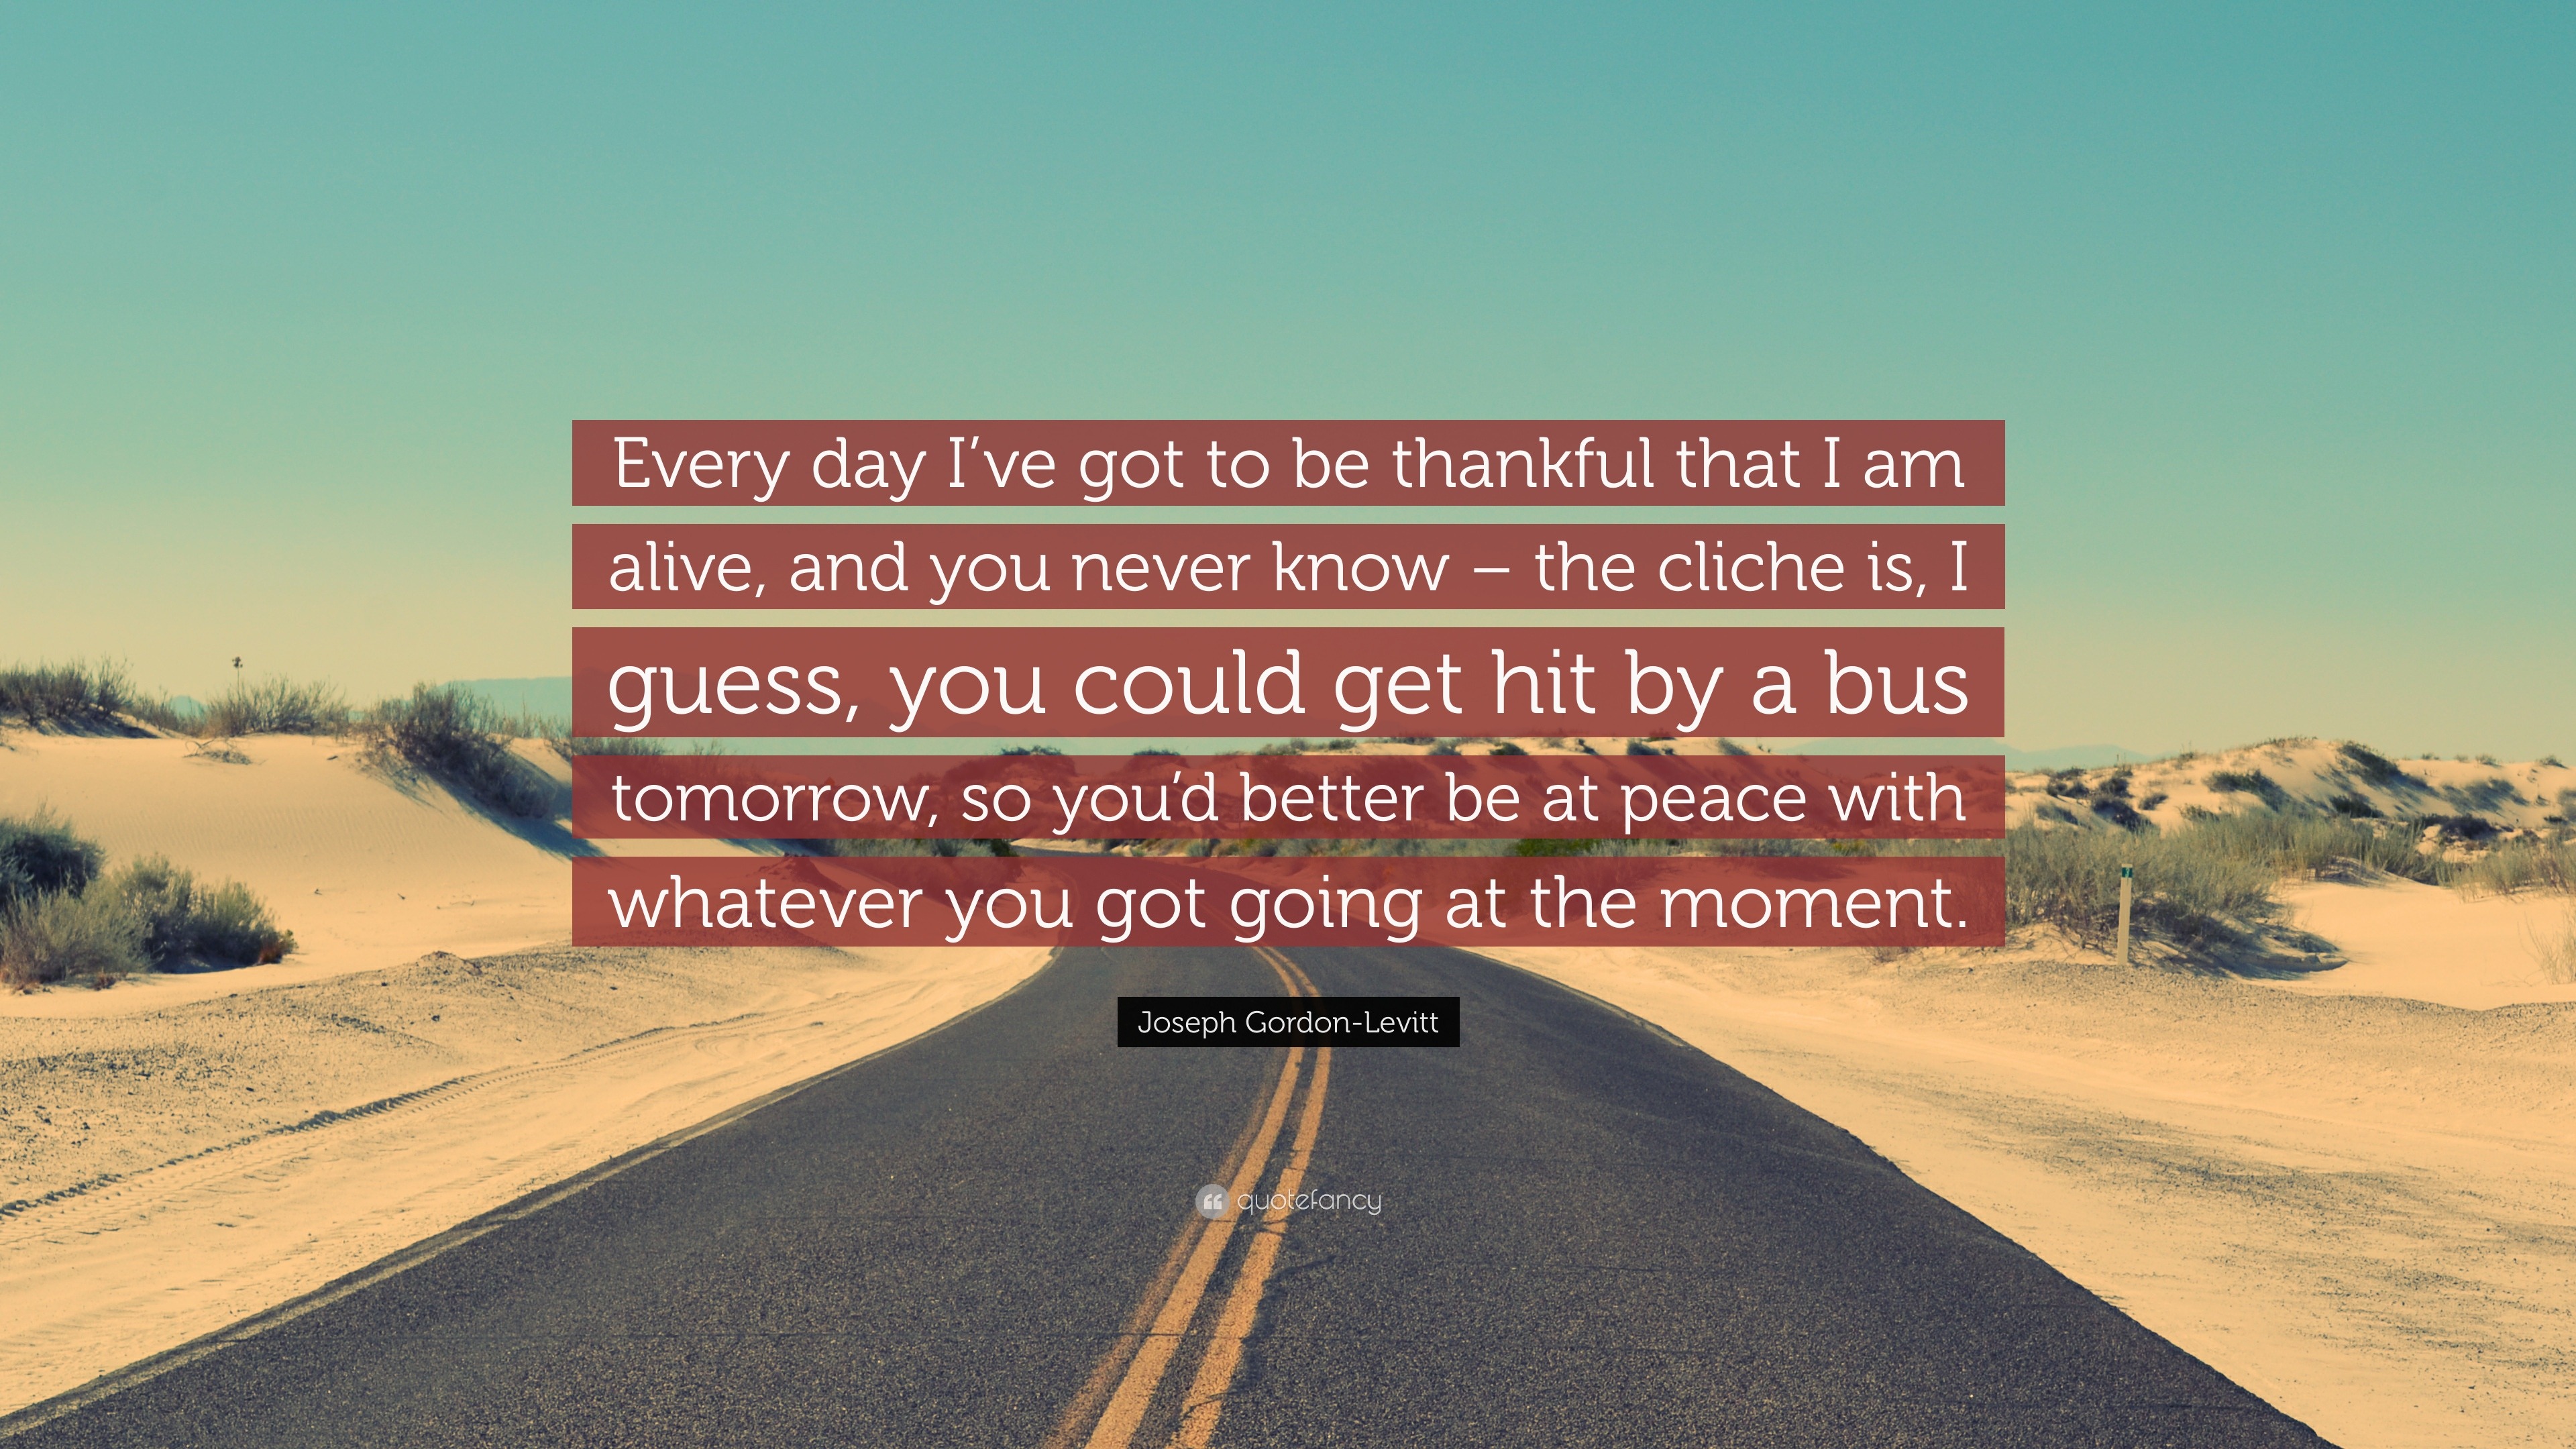 Joseph Gordon-Levitt Quote: “Every day I've got to be thankful that I am alive, and you know – the cliche is, I guess, you could get hit by a